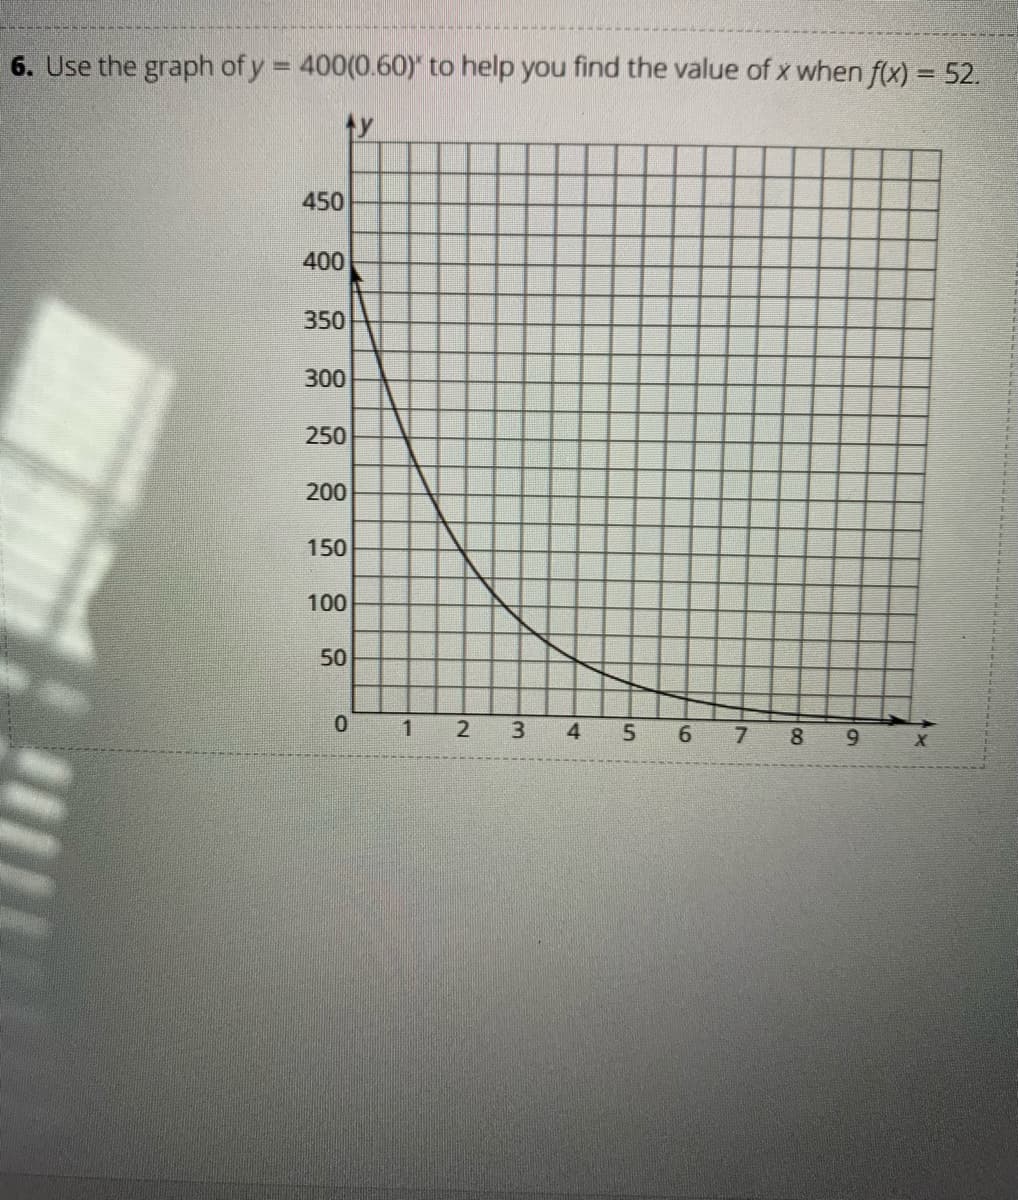 6. Use the graph of y = 400(0.60) to help you find the value of x when f(x) = 52.
ty
450
400
350
300
250
200
150
100
50
1.
2
3.
4
9
00
